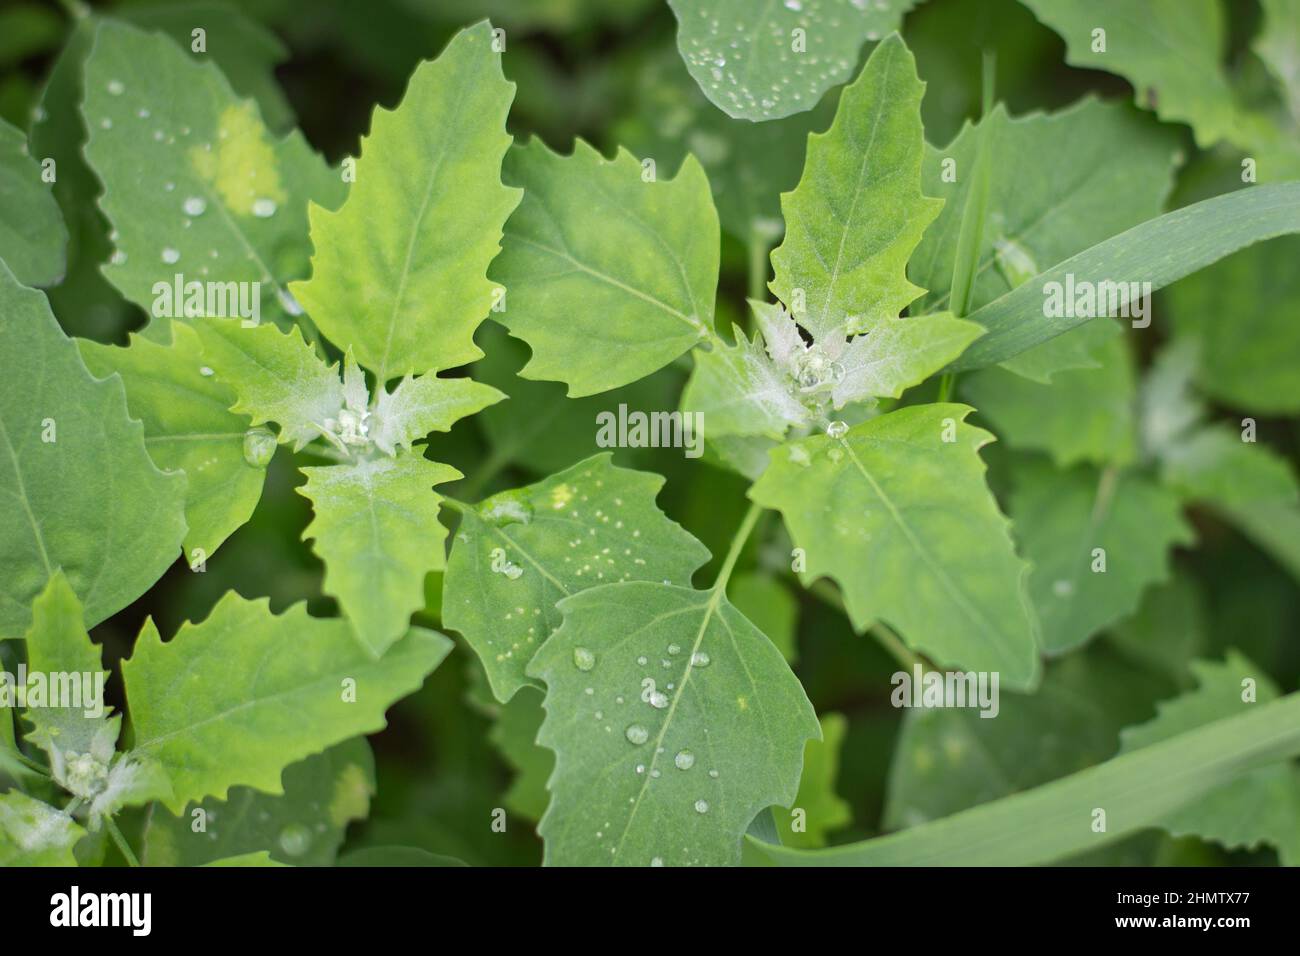 Garden orache with water drops. Leaves of grass after a rain. Stock Photo